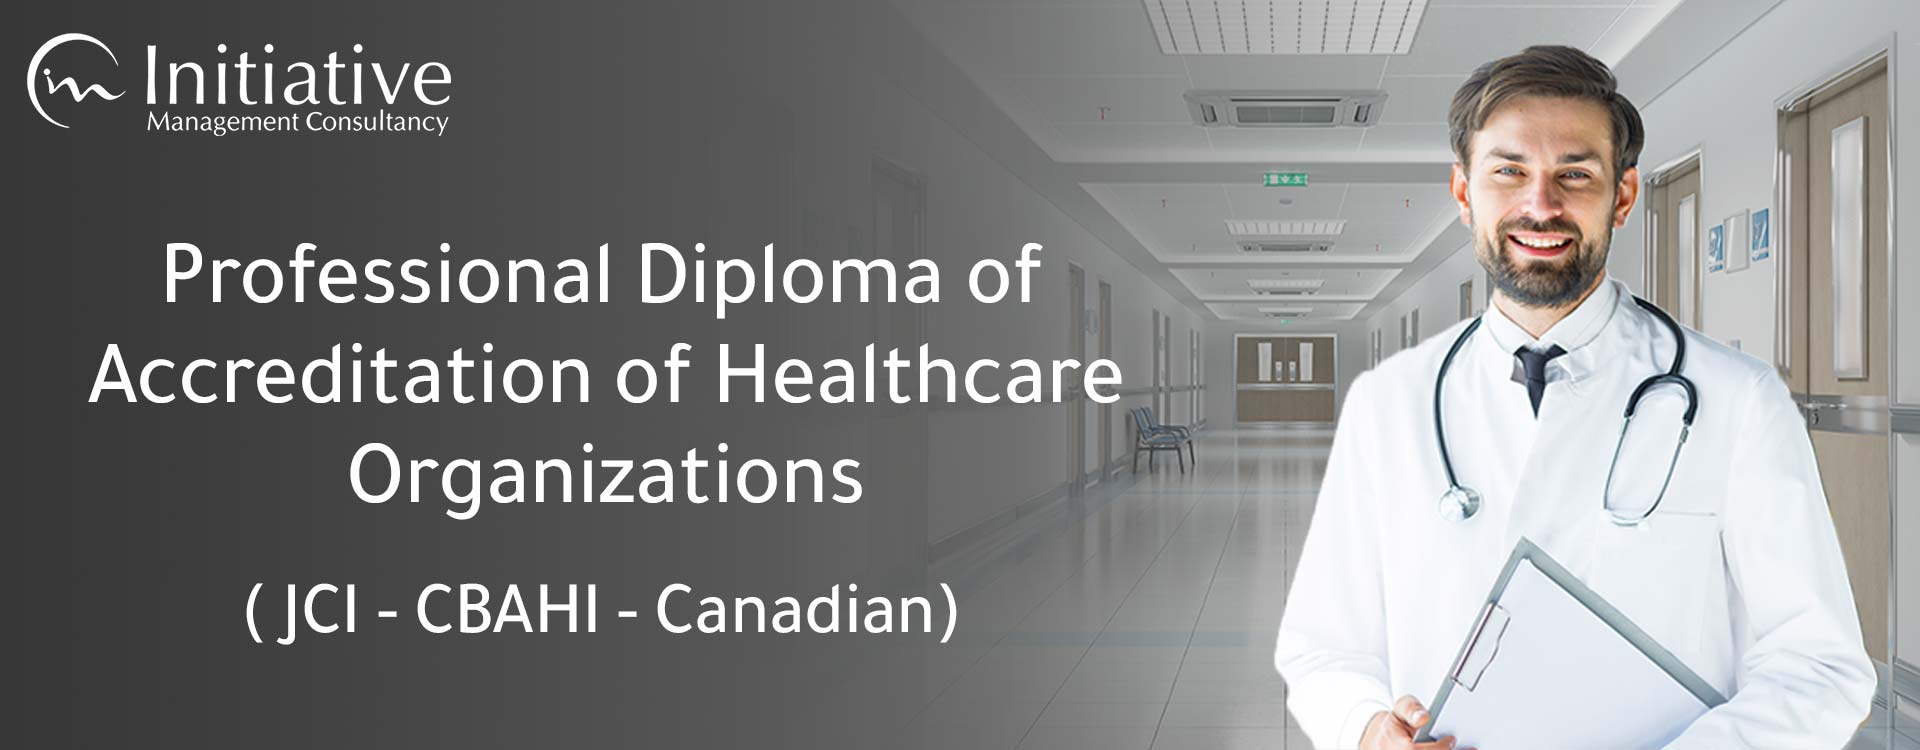 Professional Diploma of Accreditation of Healthcare Organizations